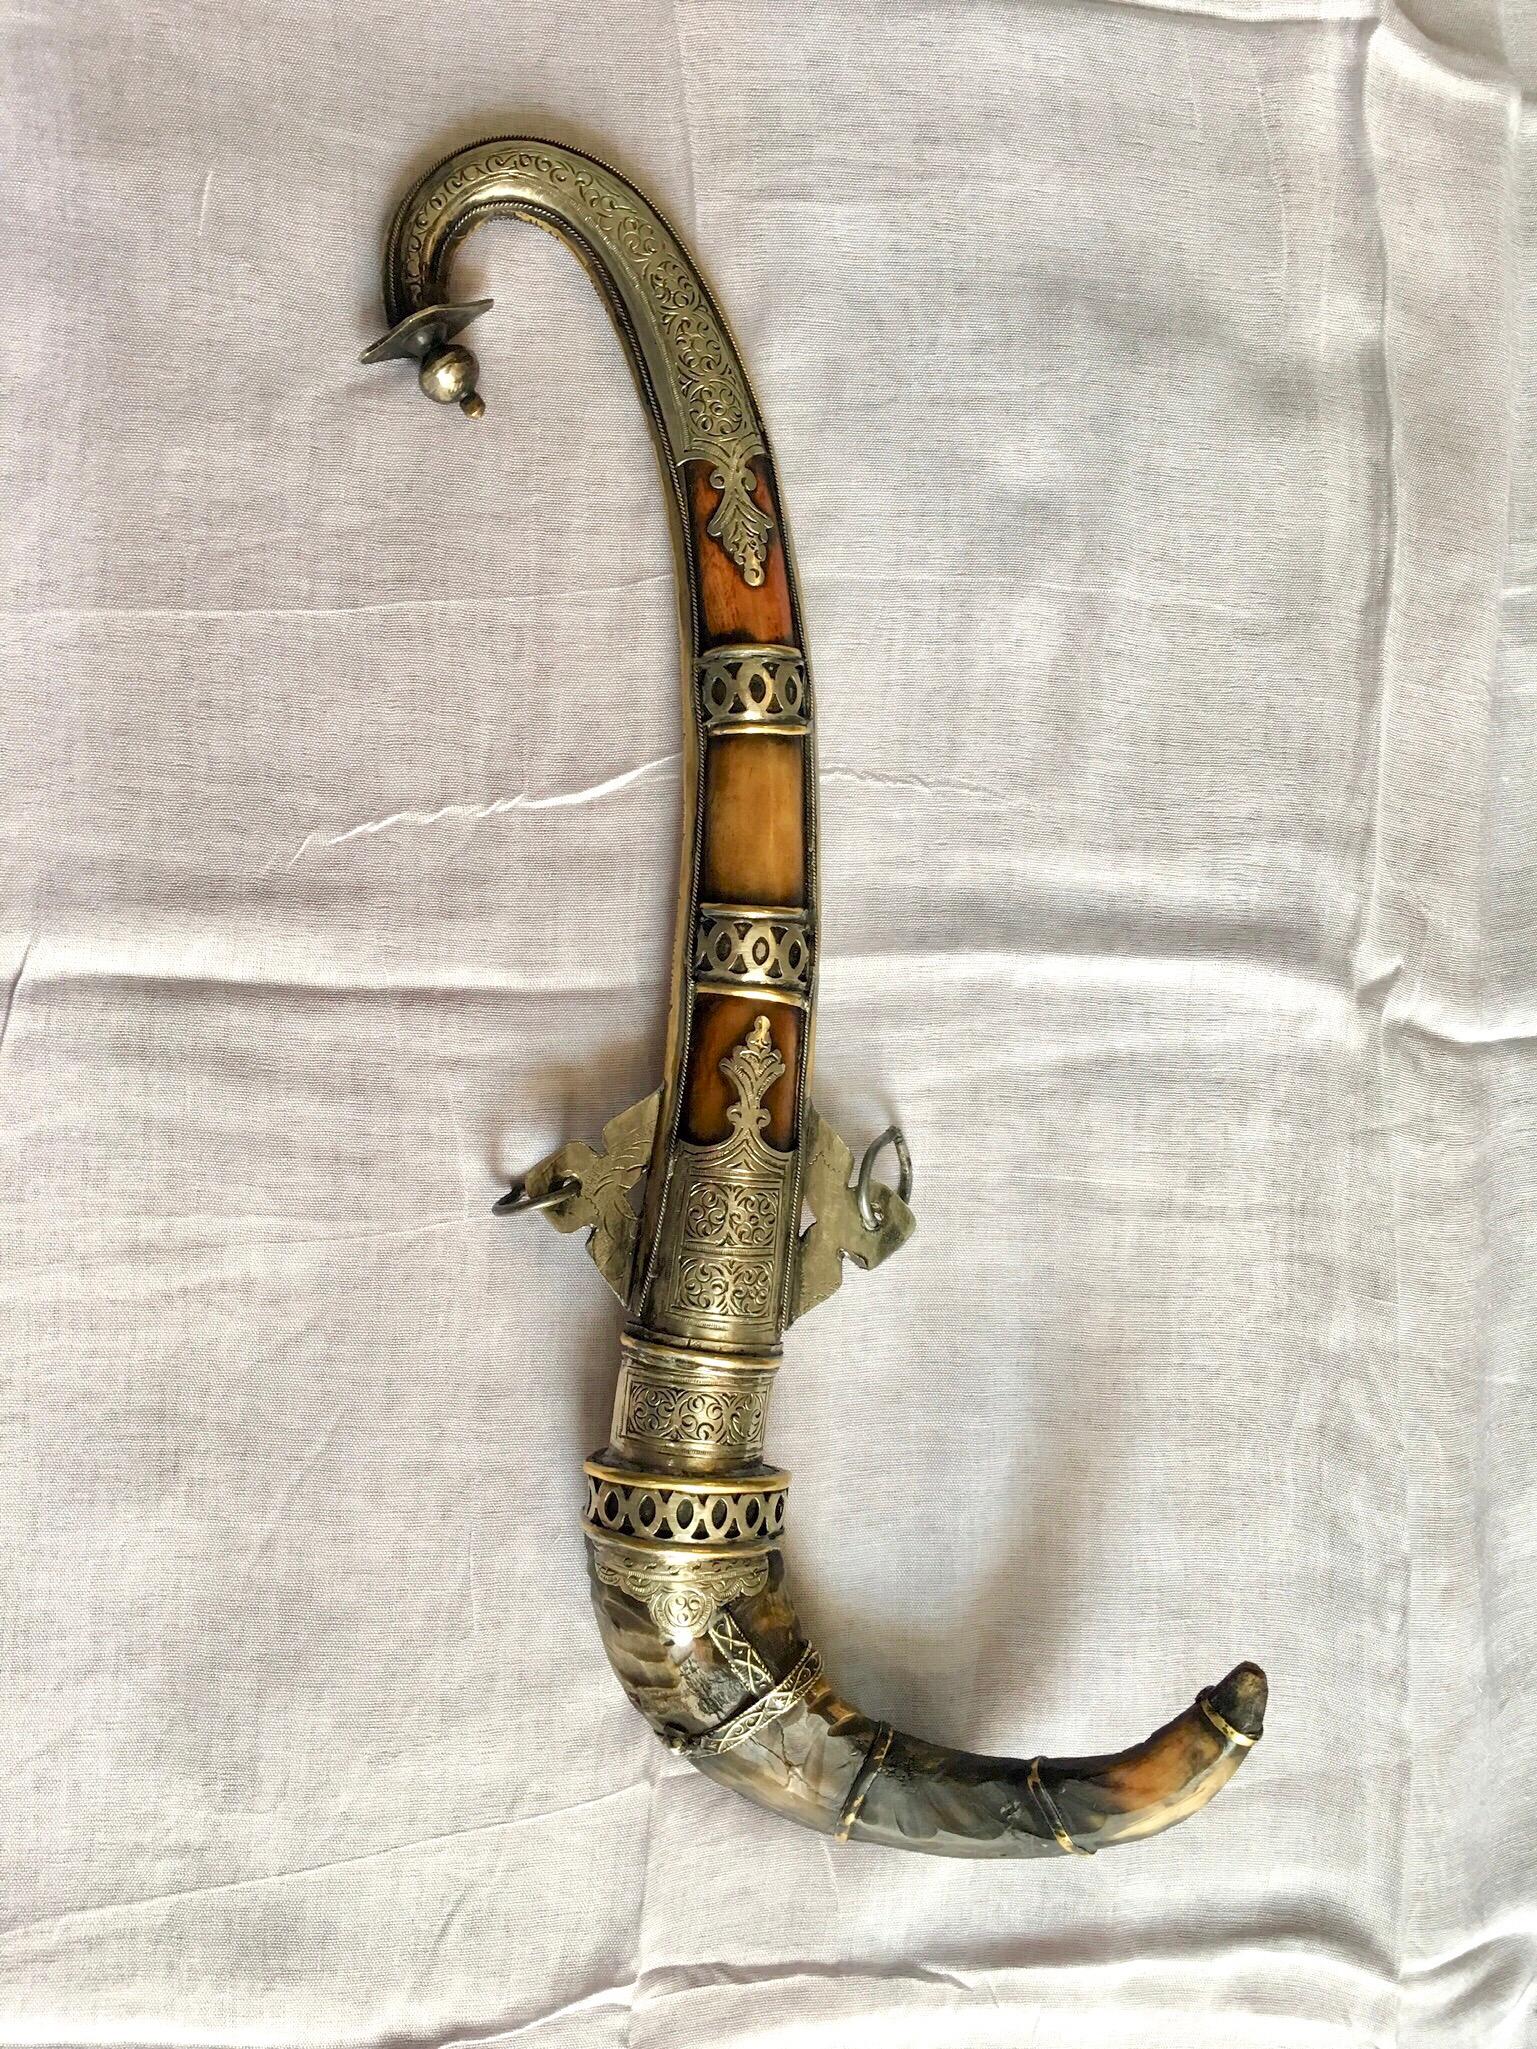 This vintage Moroccan dagger is known as a Khanjar. It has a curved metal blade, with a handle made from gazelle Horn and a sheath of camel bone. The metalwork is silver melange, intricately hand-etched with beautiful and detailed designs. Two rings